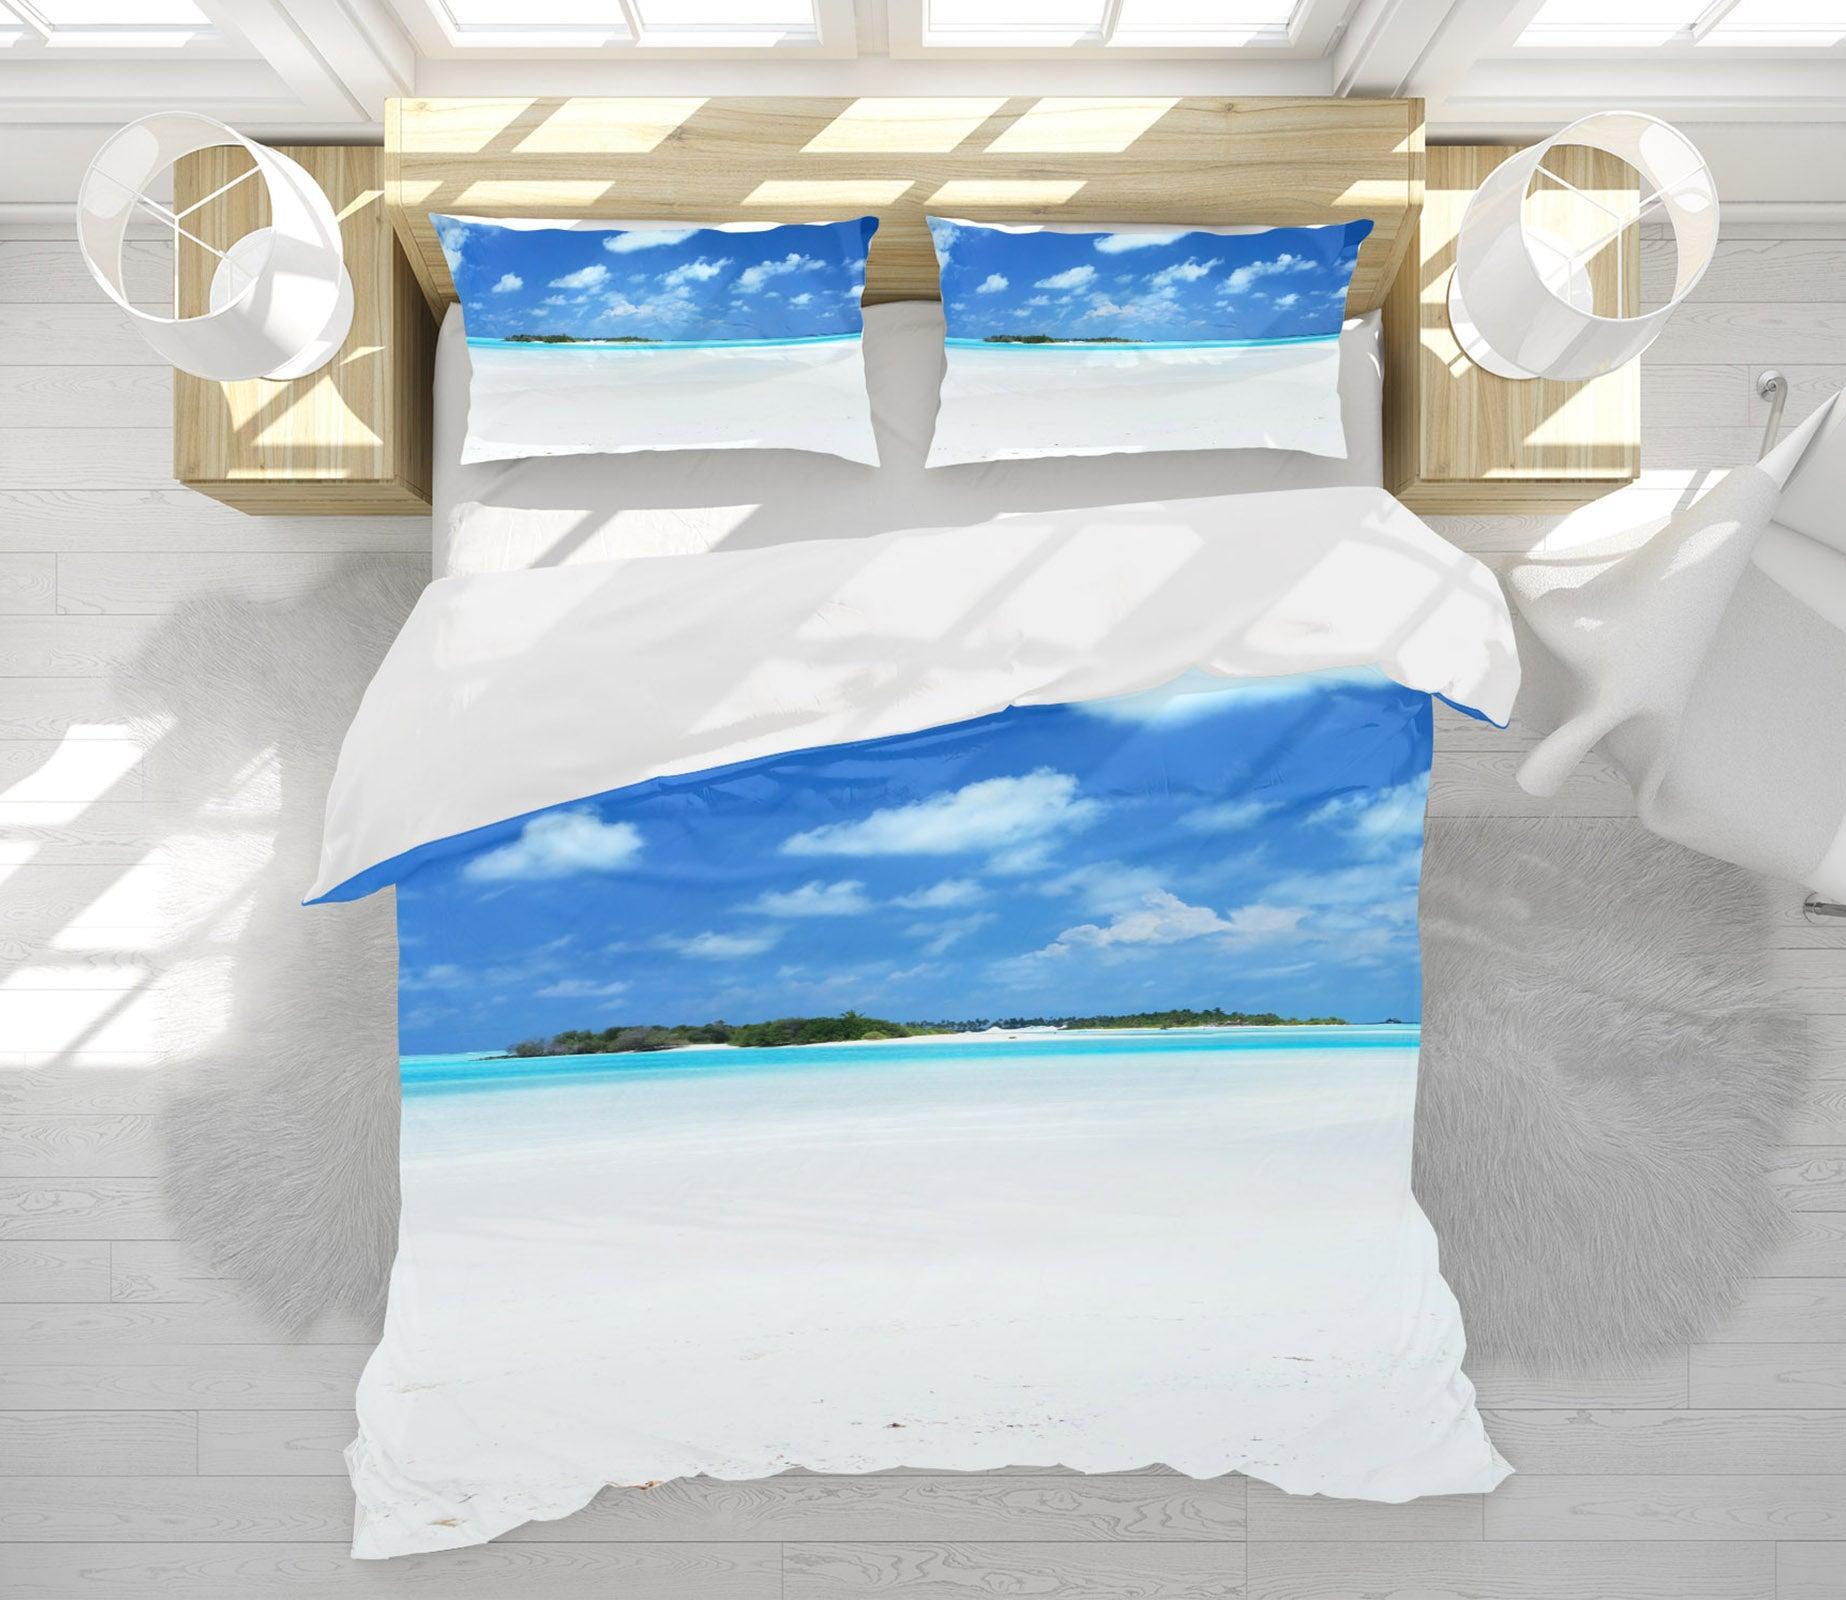 3D Sky Beach 1827 Matteo Colombo Quilt Cover Set Bedding Set Pillowcases 3D Bed Pillowcases Quilt Duvet cover